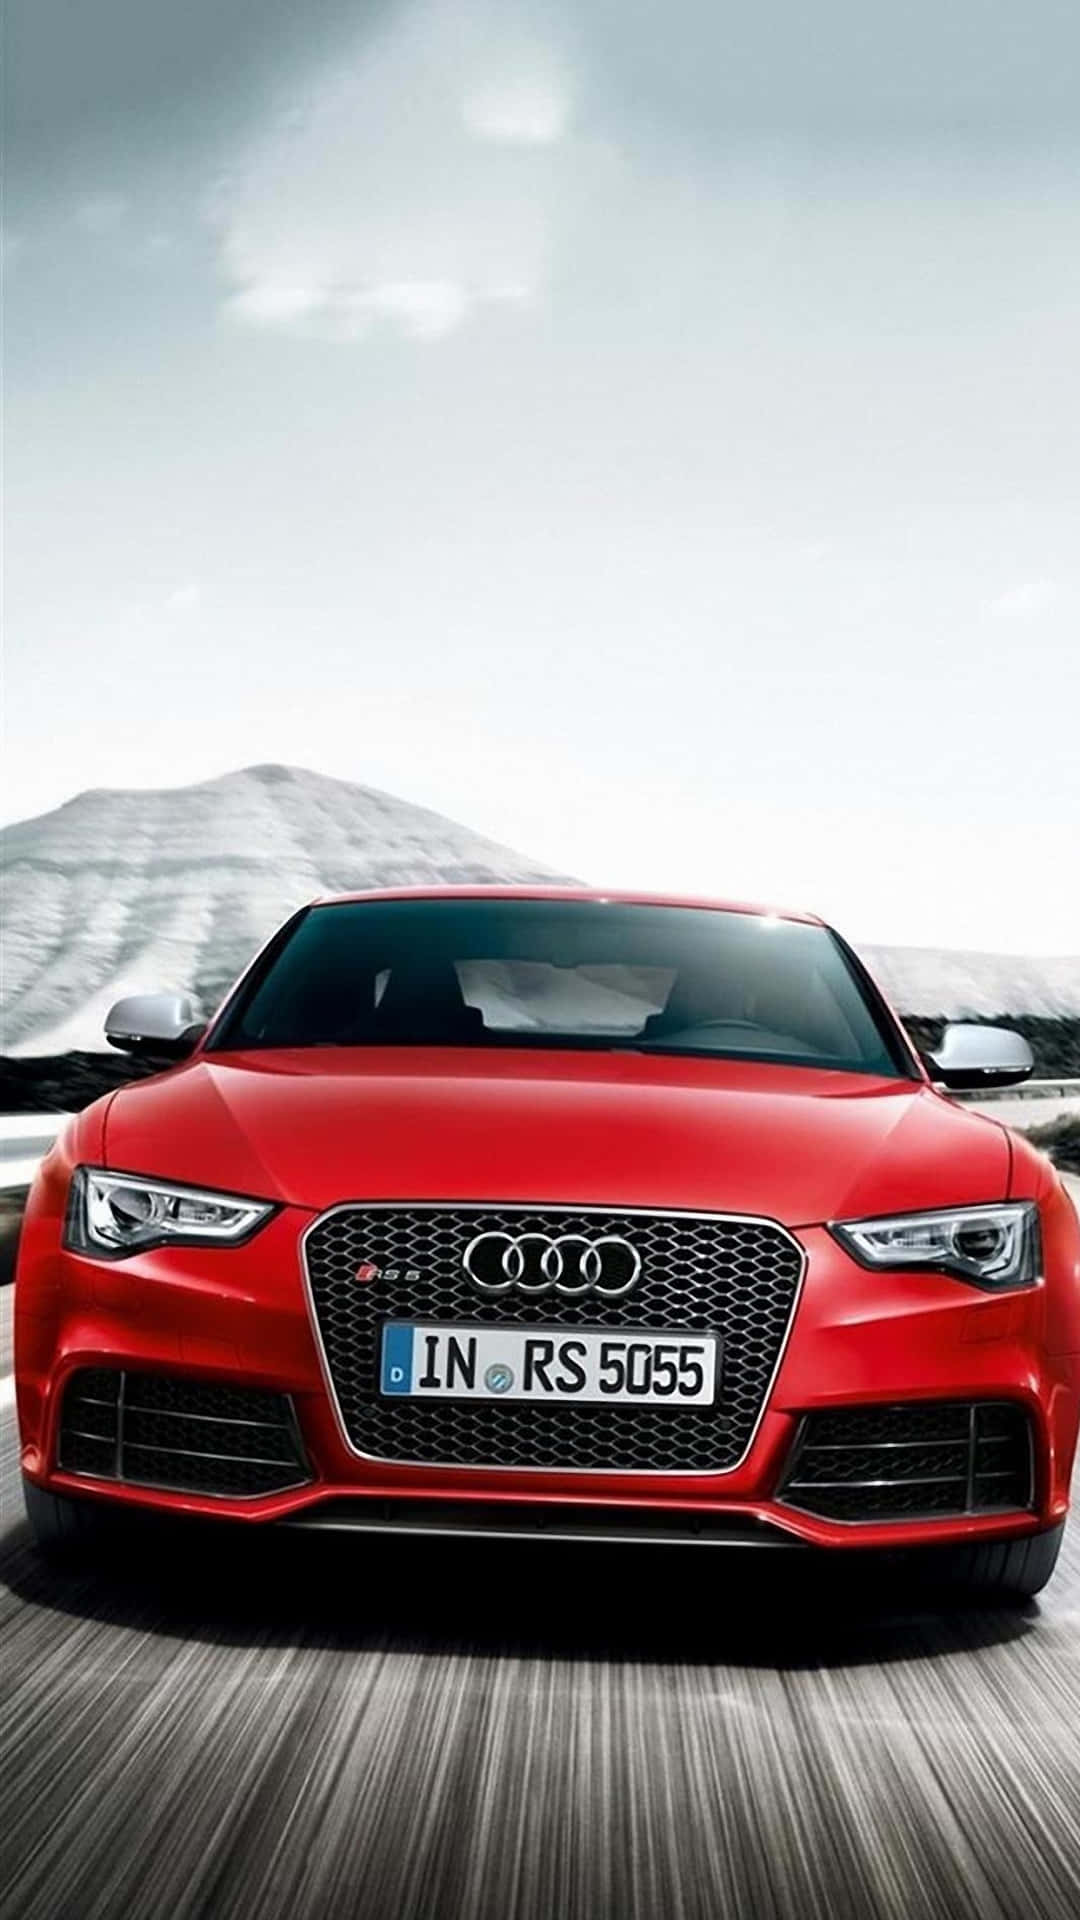 Free Audi Iphone Wallpaper Downloads, [100+] Audi Iphone Wallpapers for  FREE 